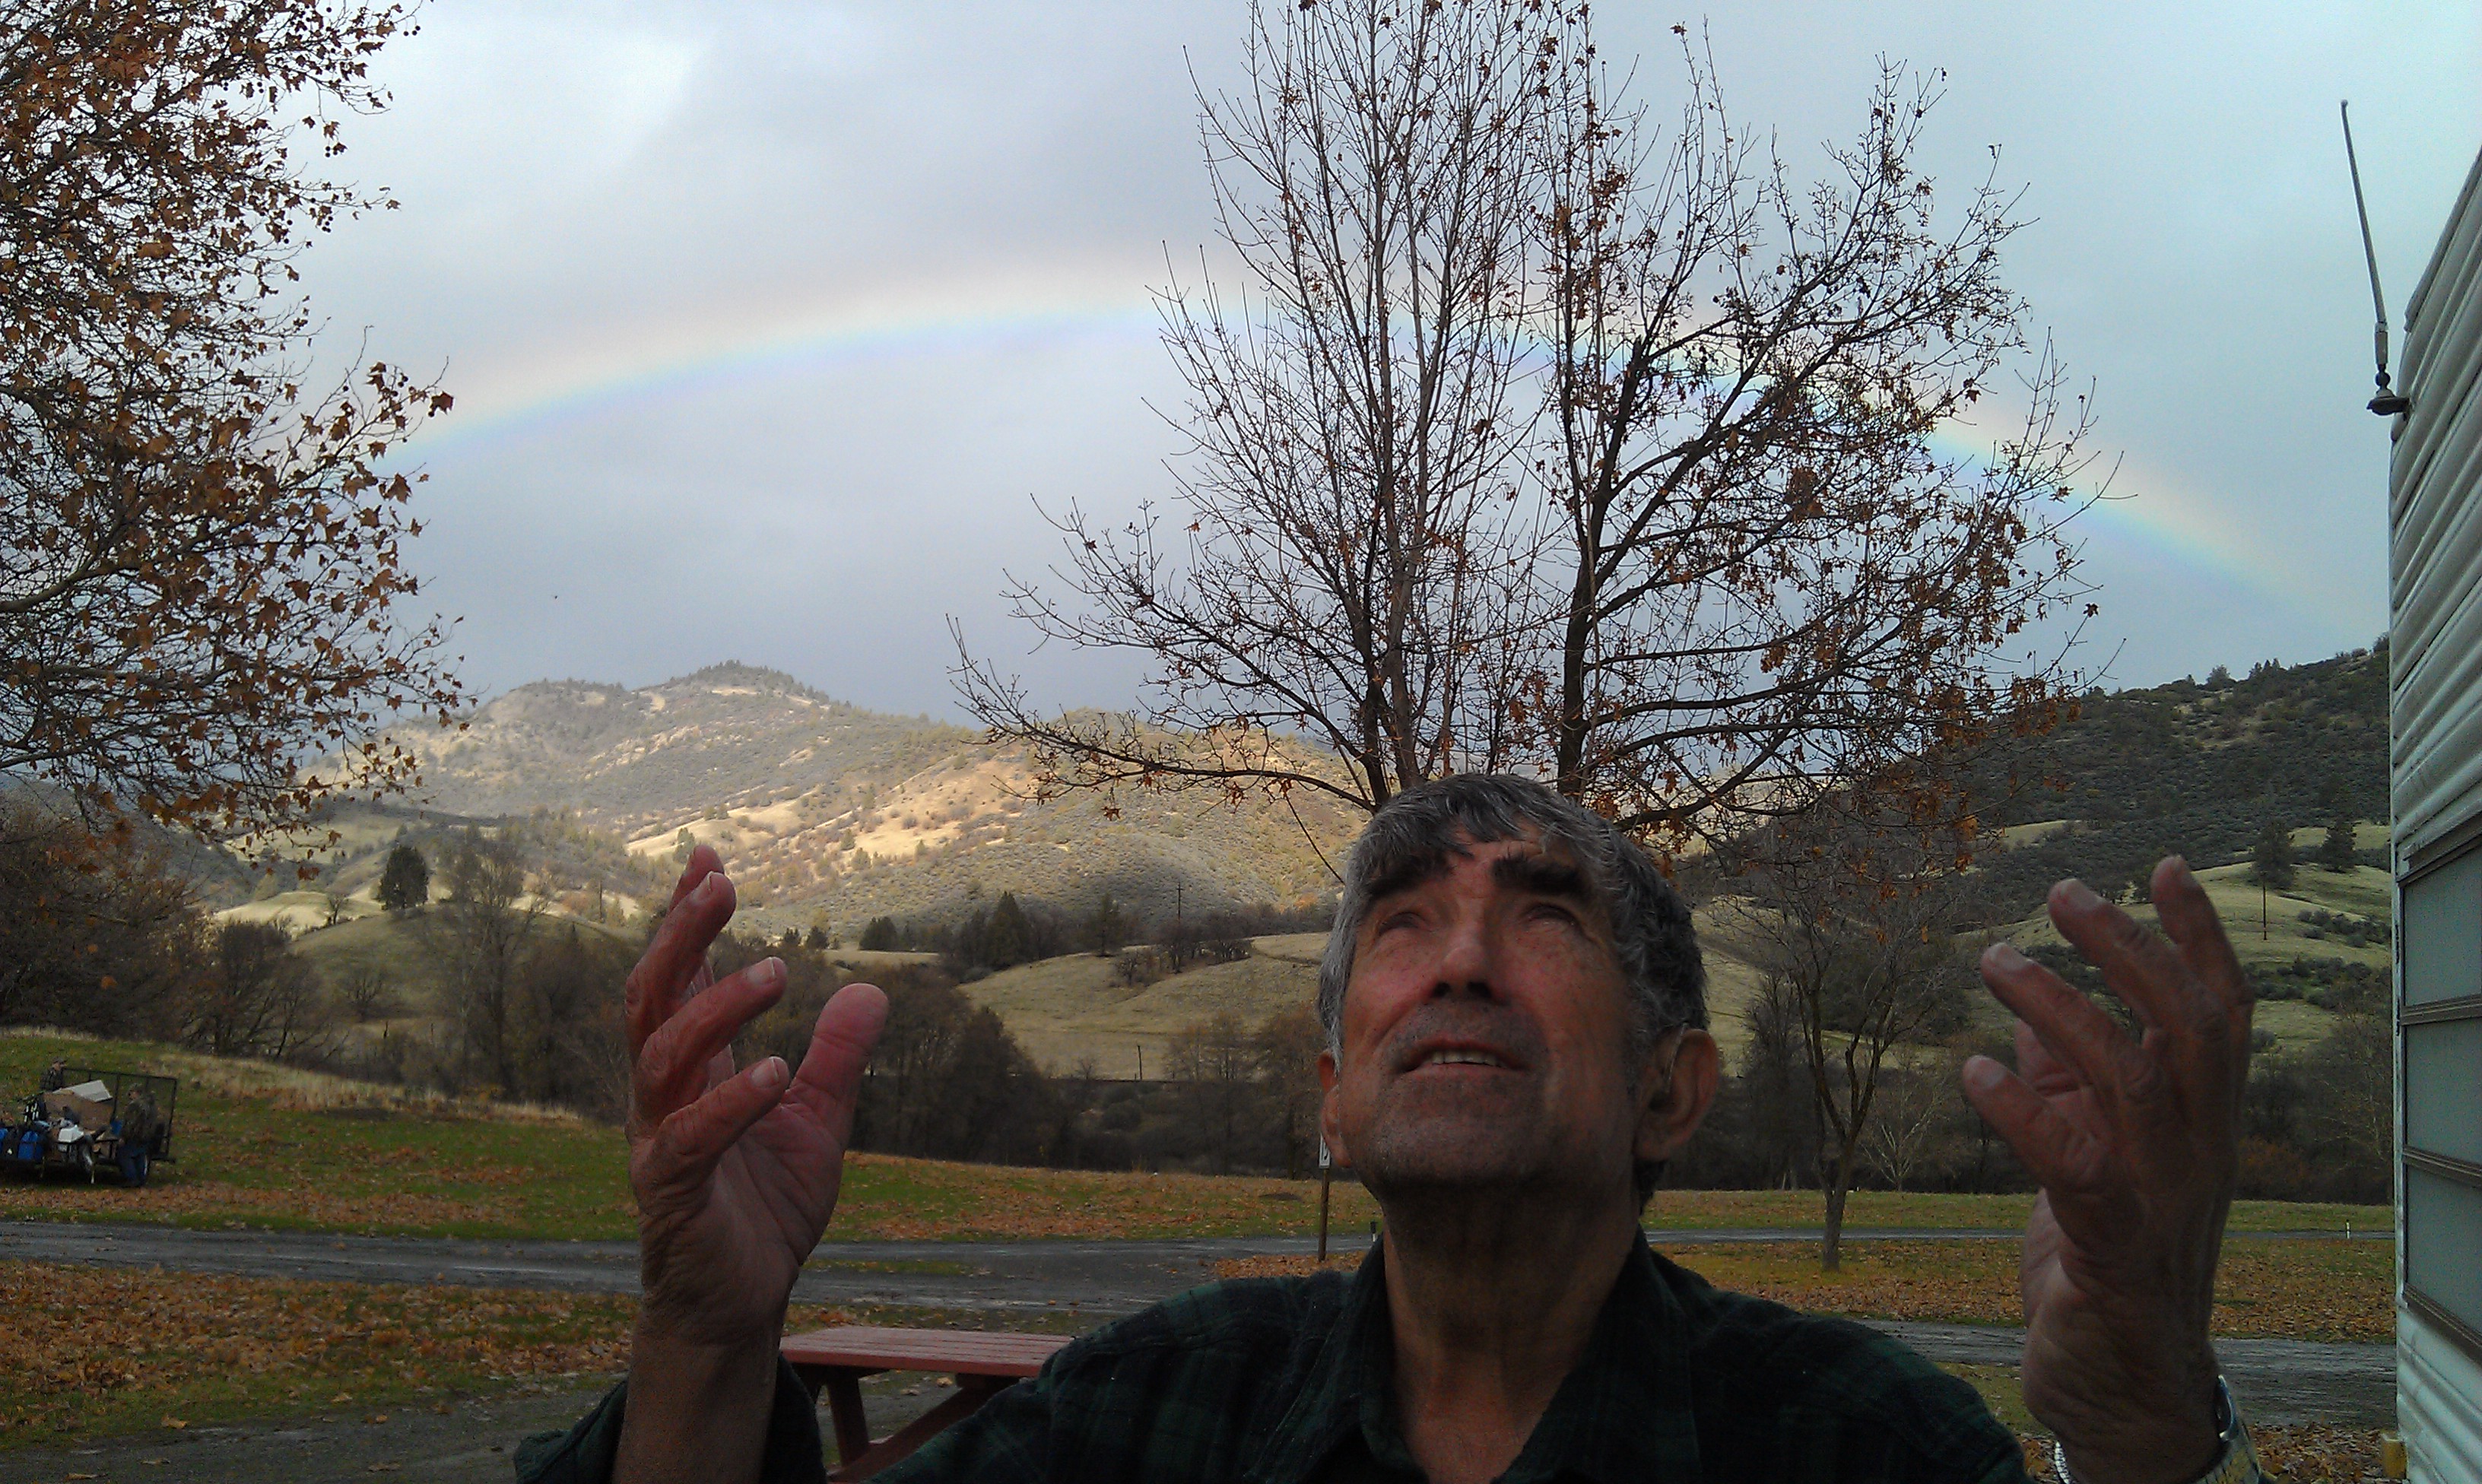 Woody excitedly remembering again God's goodness with a rainbow in the background!